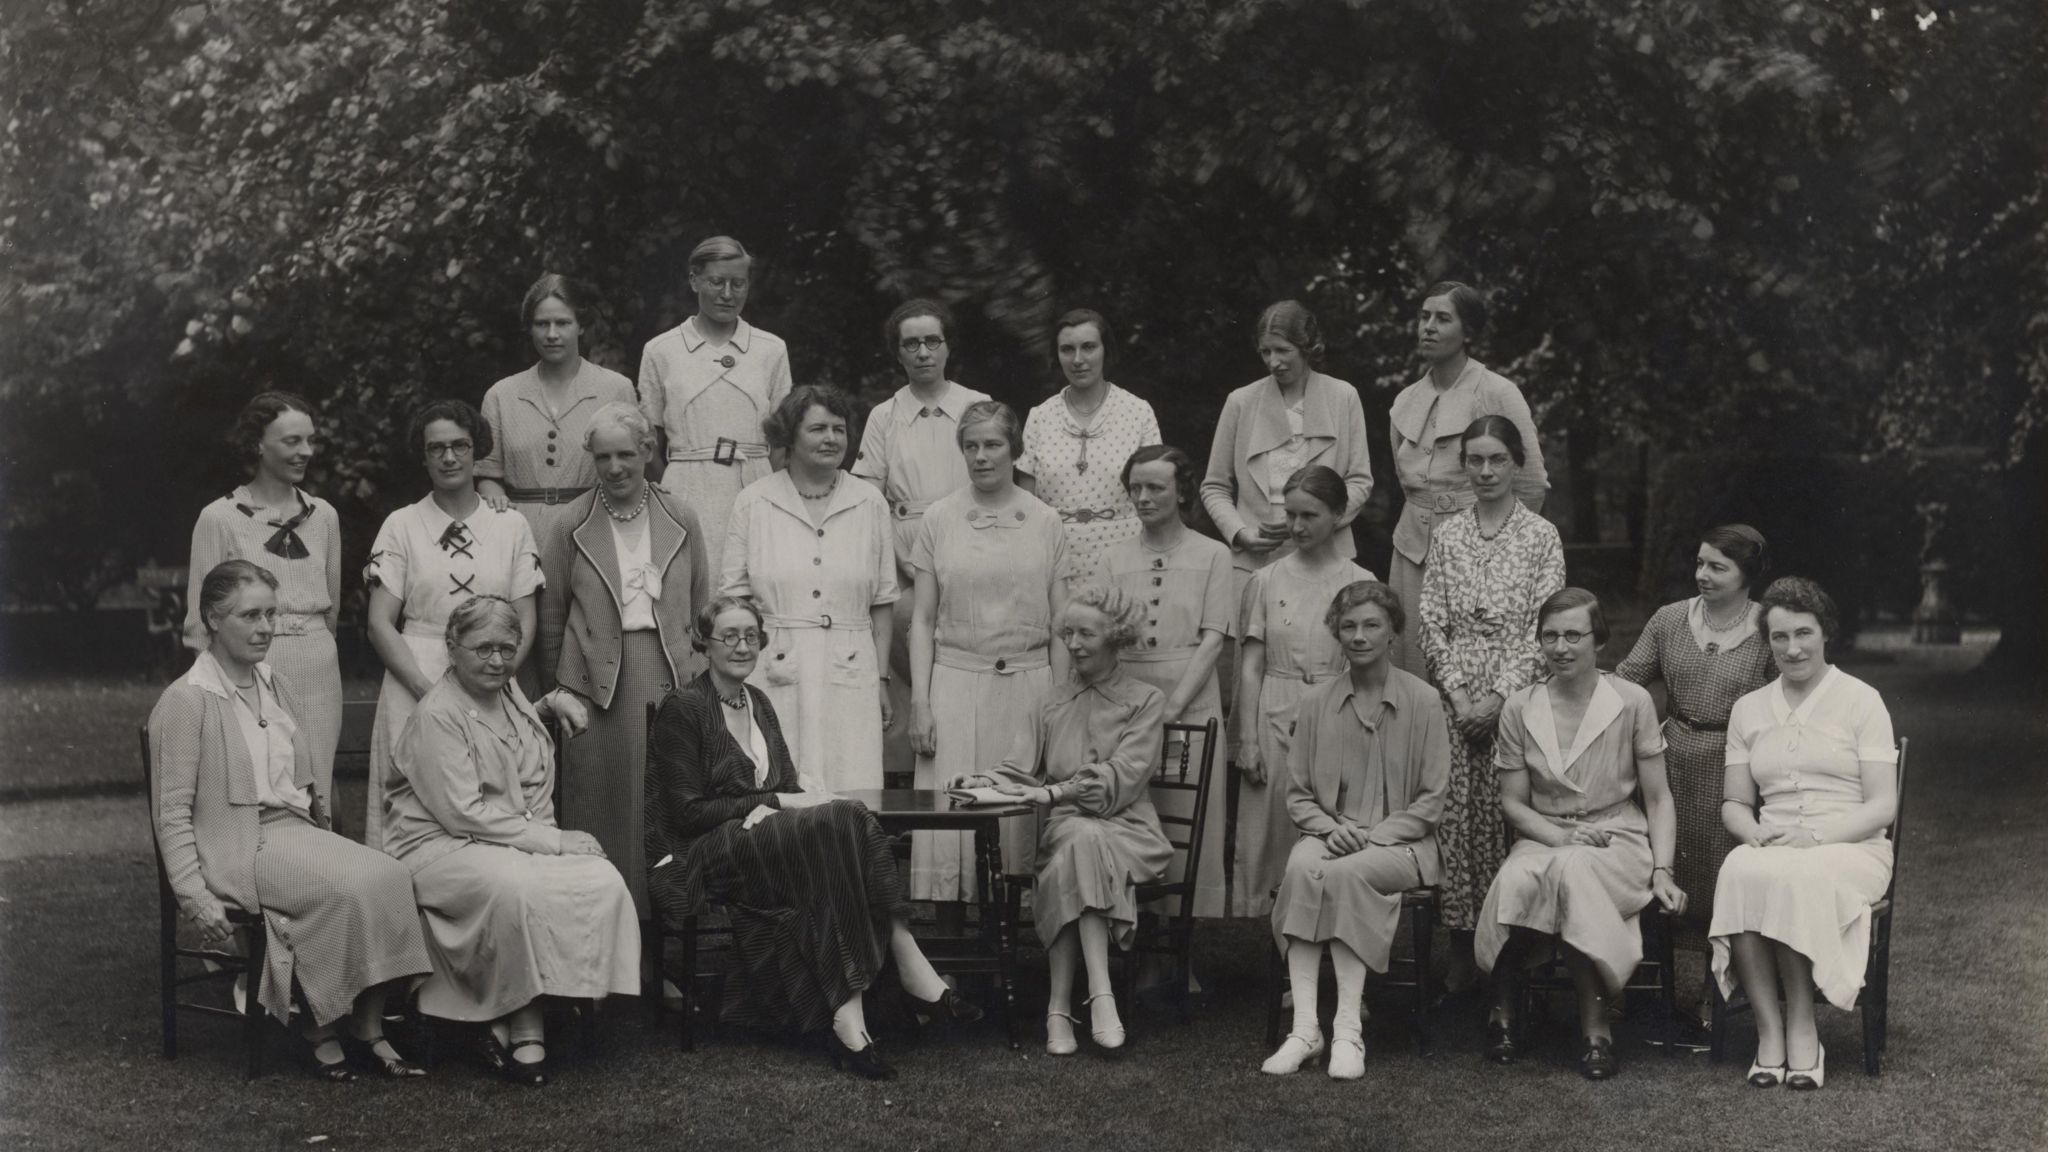 the Principal and Fellows in 1936, with Pernel Strachey (front row, 3rd from left), Alda Milner-Barry (middle row, 4th from left), and Dorothy Garrod (back row, 3rd from left)